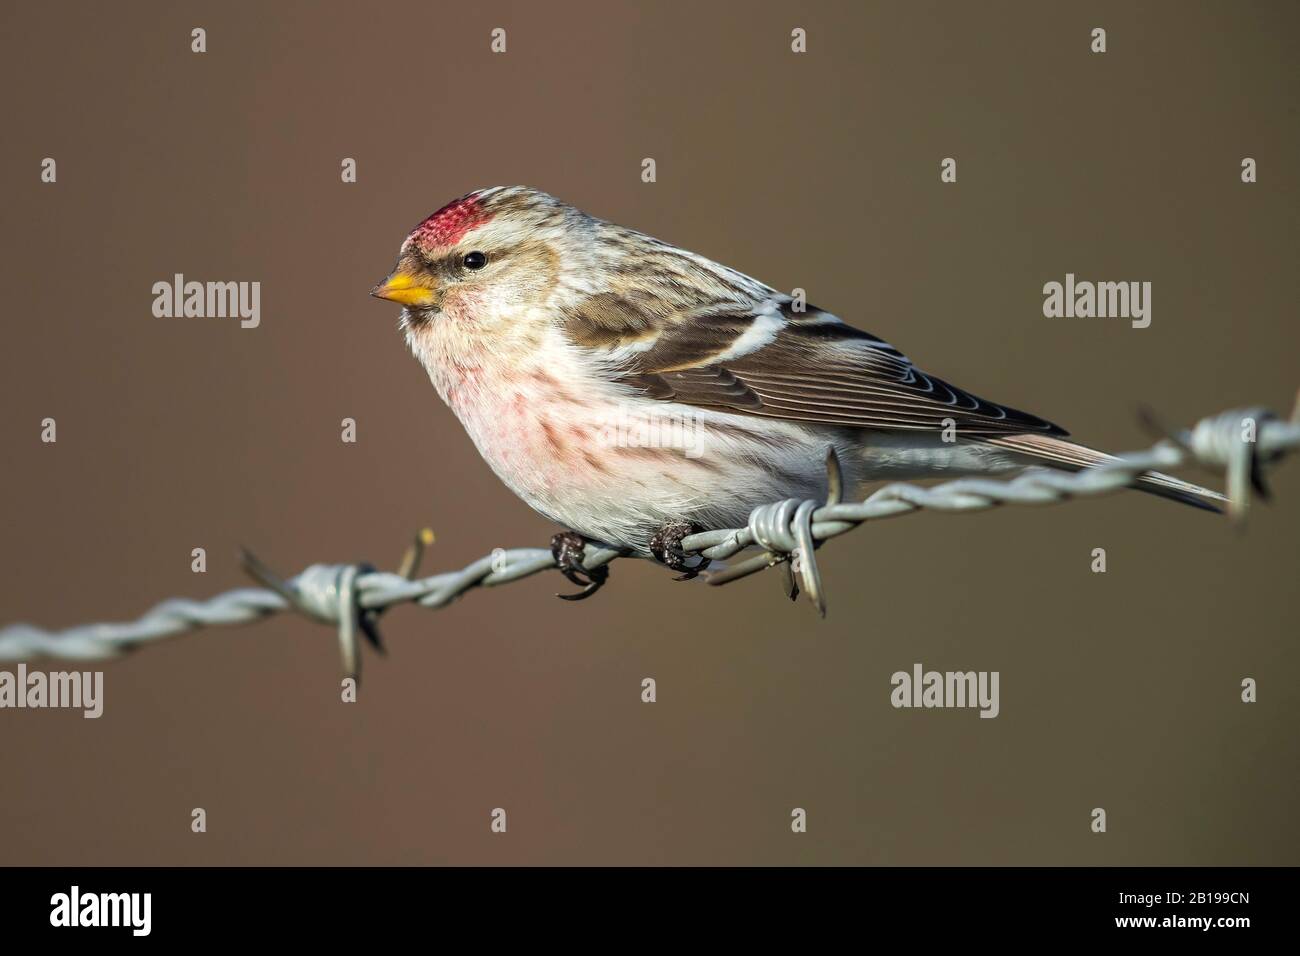 arctic redpoll, hoary redpoll (Carduelis hornemanni exilipes, Acanthis hornemanni exilipes), male perched on a wire, Netherlands, Gelderland Stock Photo